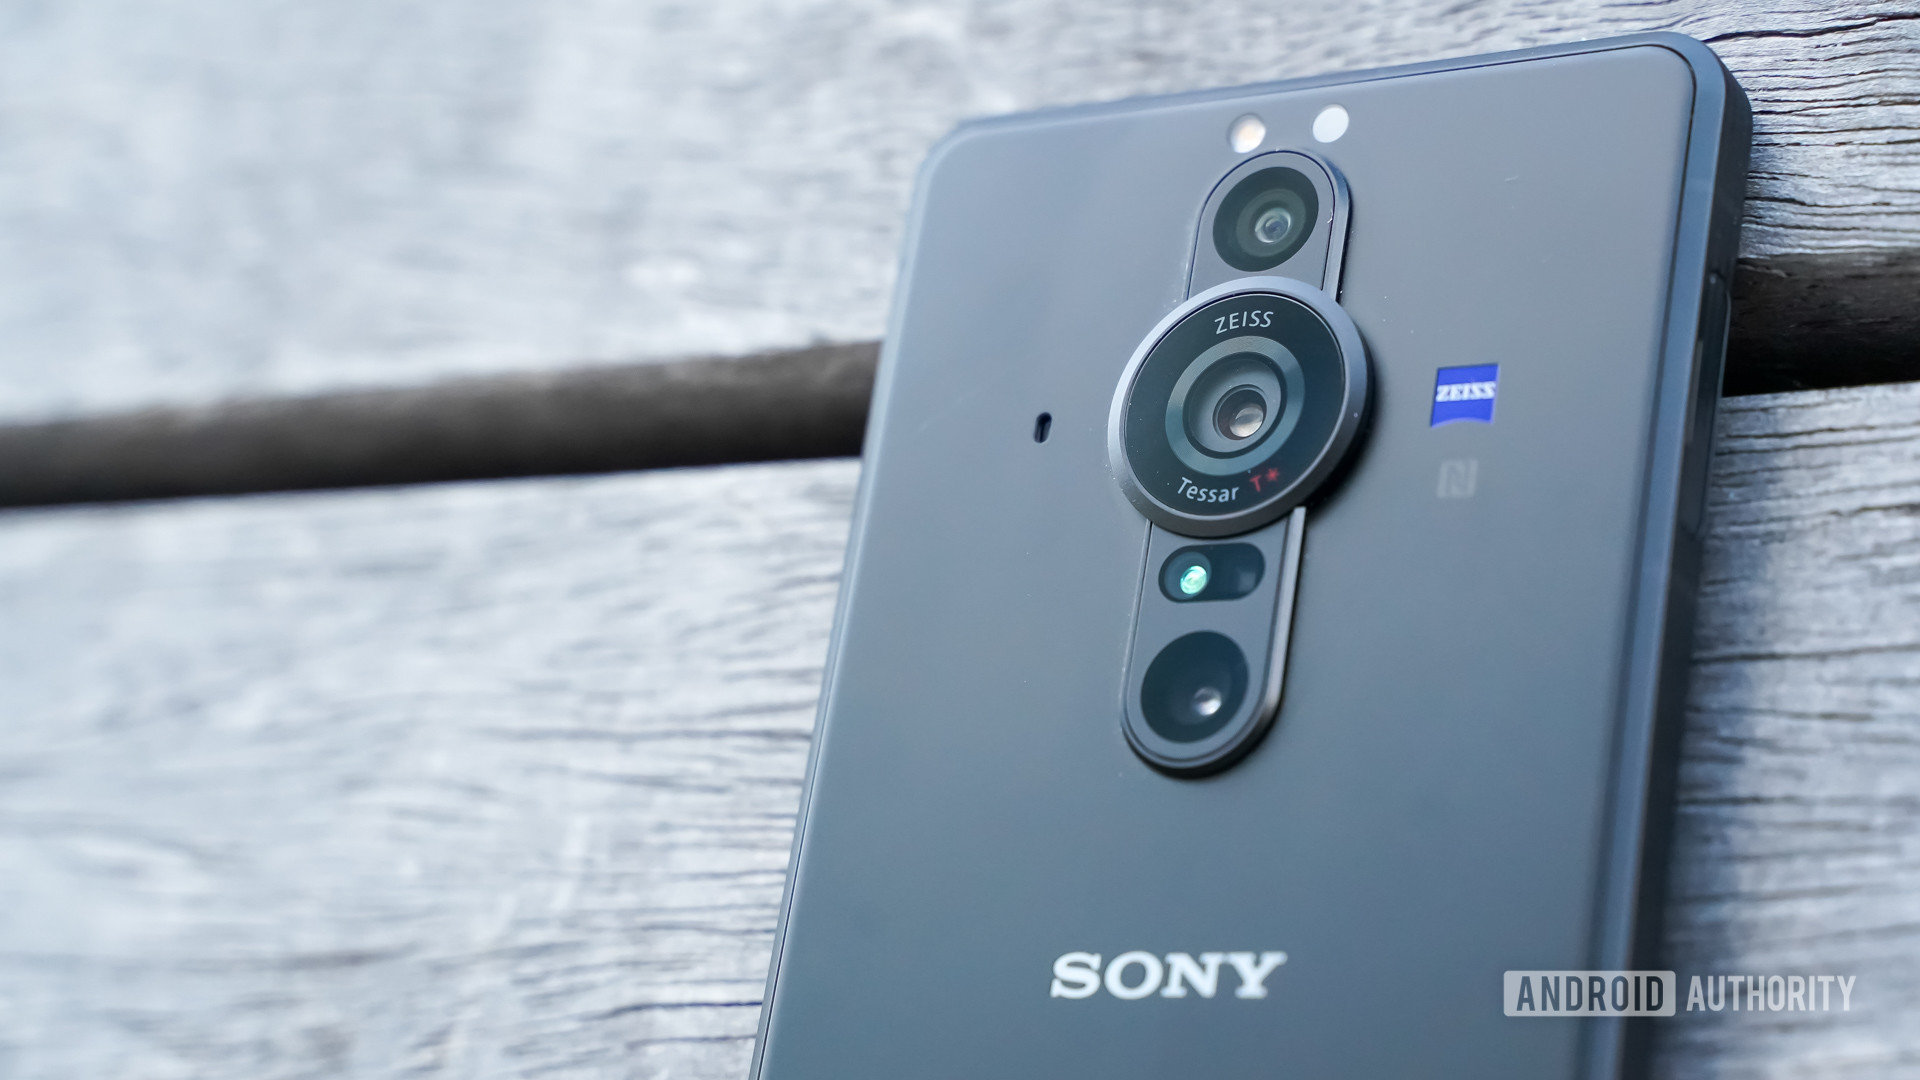 lening Continentaal animatie Sony Xperia Pro-I review: Not for 'normals,' best left to pros